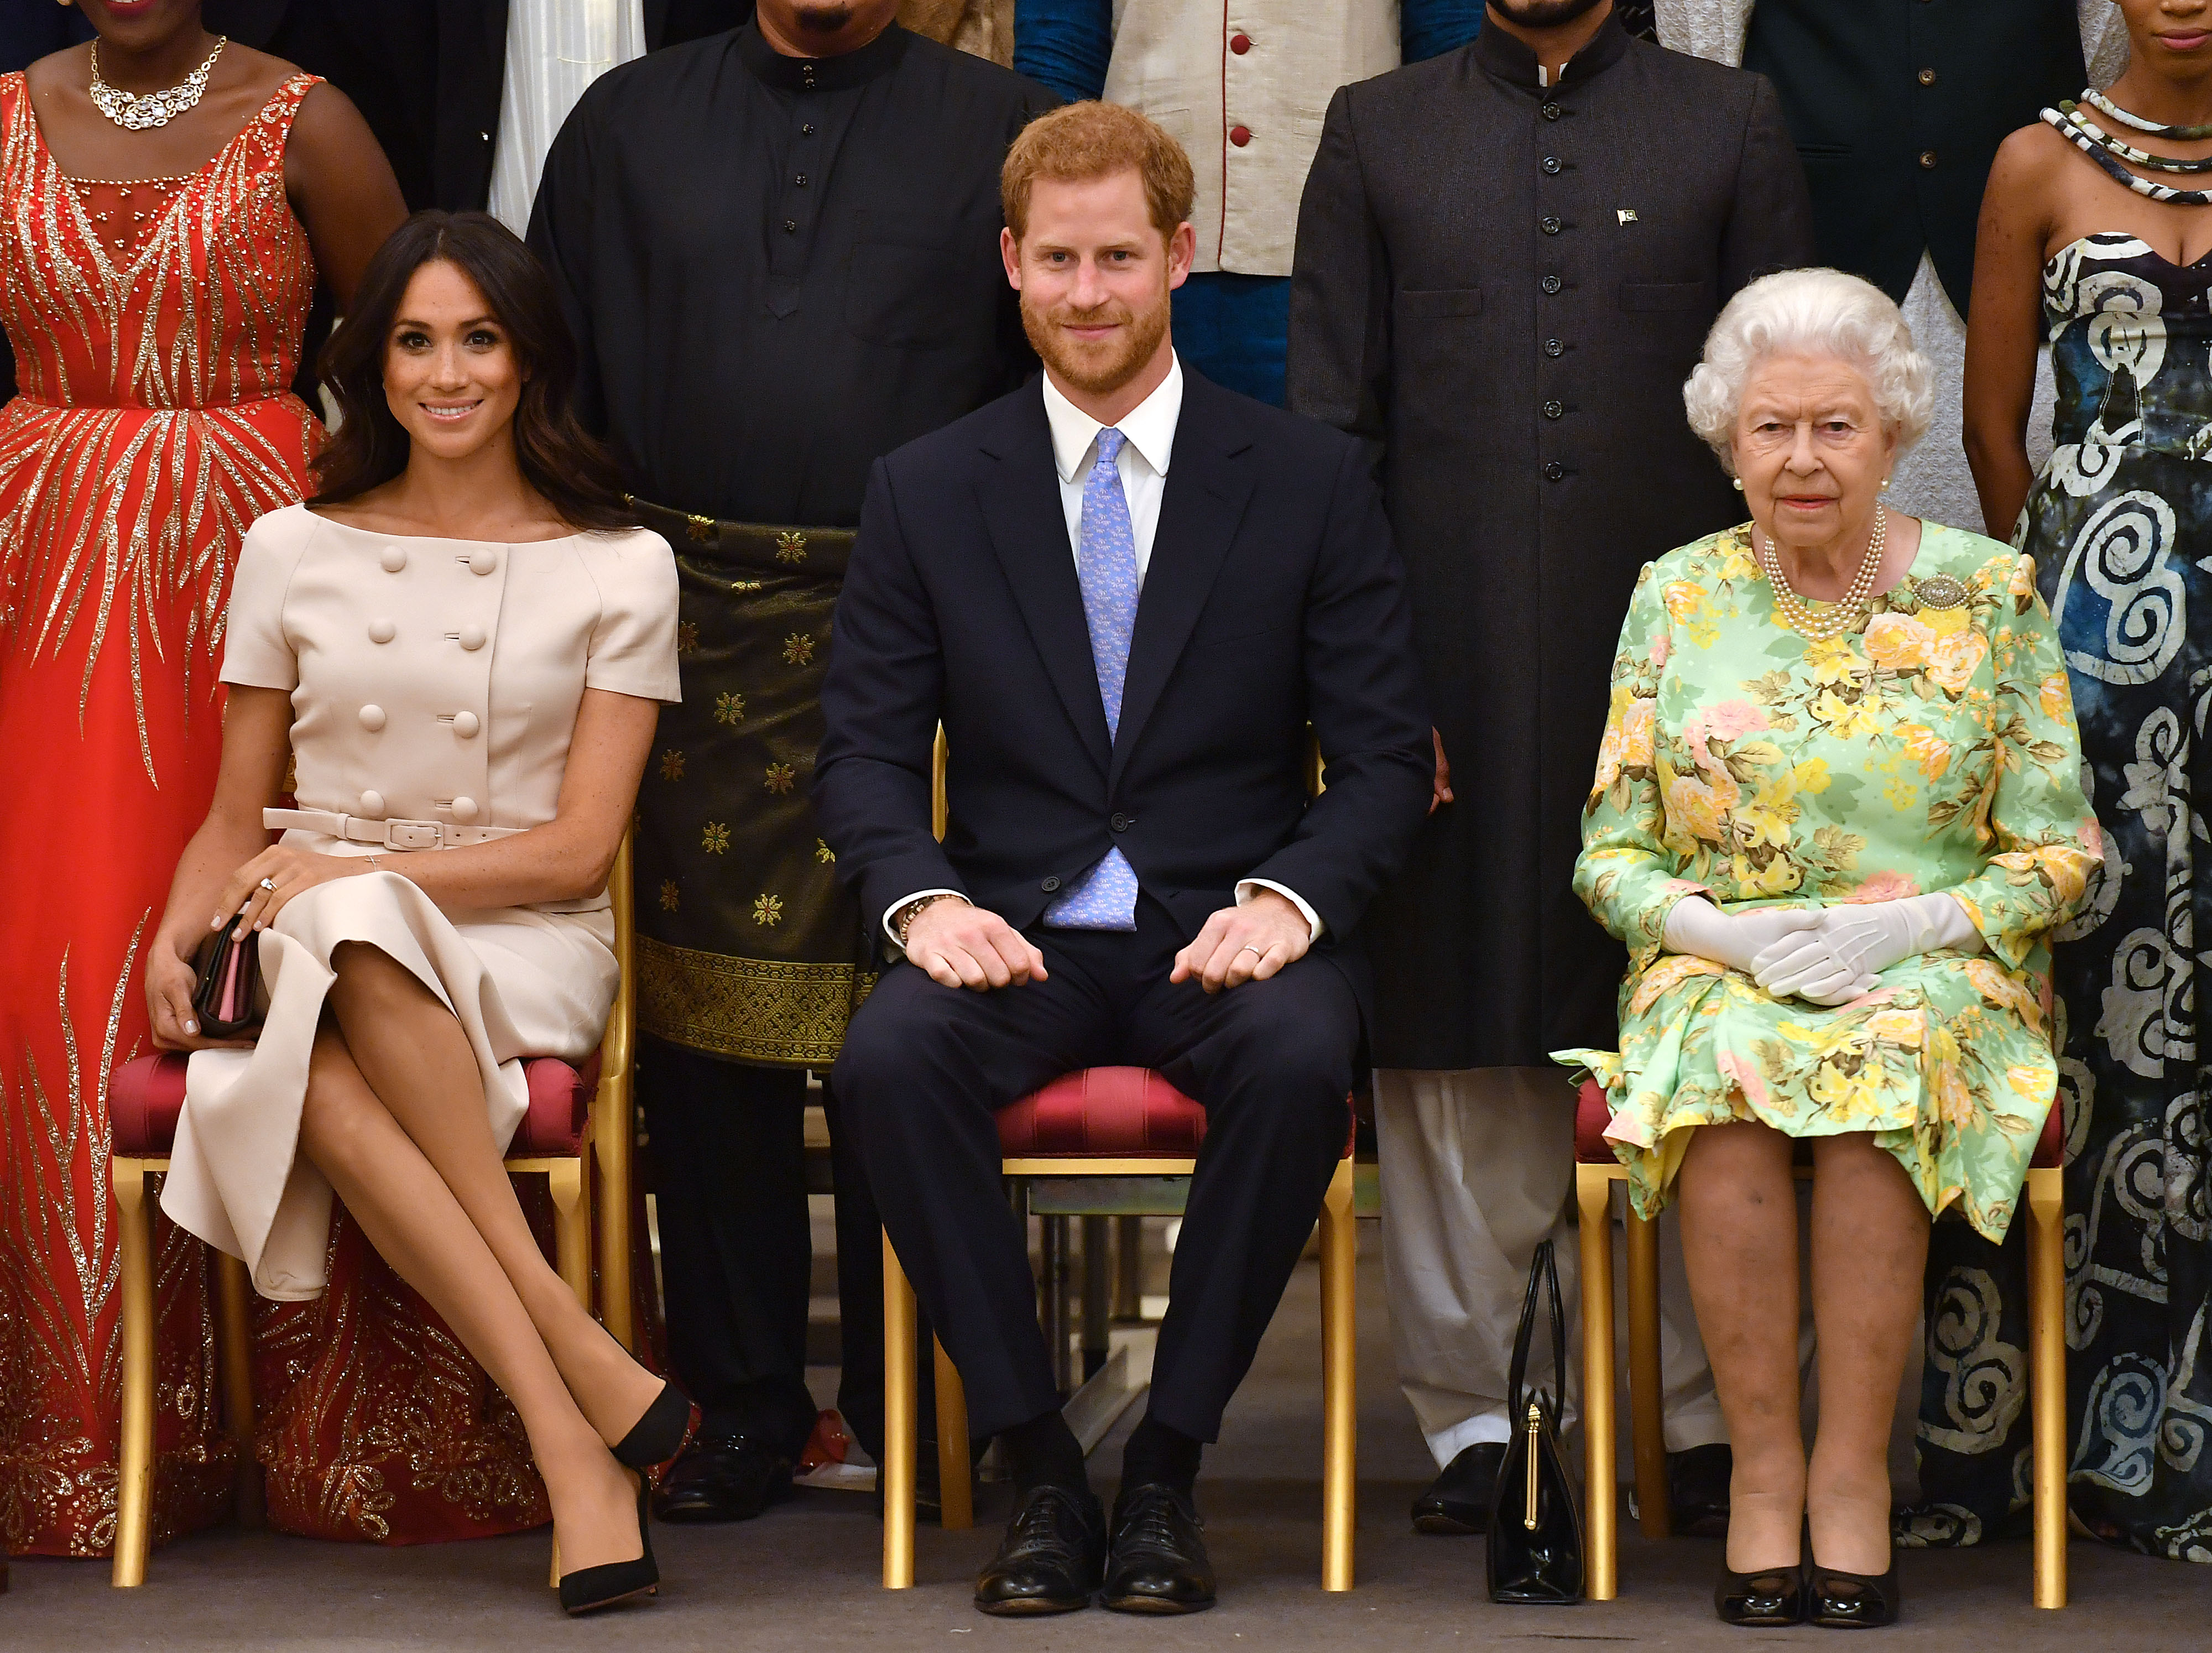 Meghan, Duchess of Sussex, Prince Harry, Duke of Sussex and Queen Elizabeth II at the Queen's Young Leaders Awards Ceremony at Buckingham Palace on June 26, 2018 in London, England. | Source: Getty Images